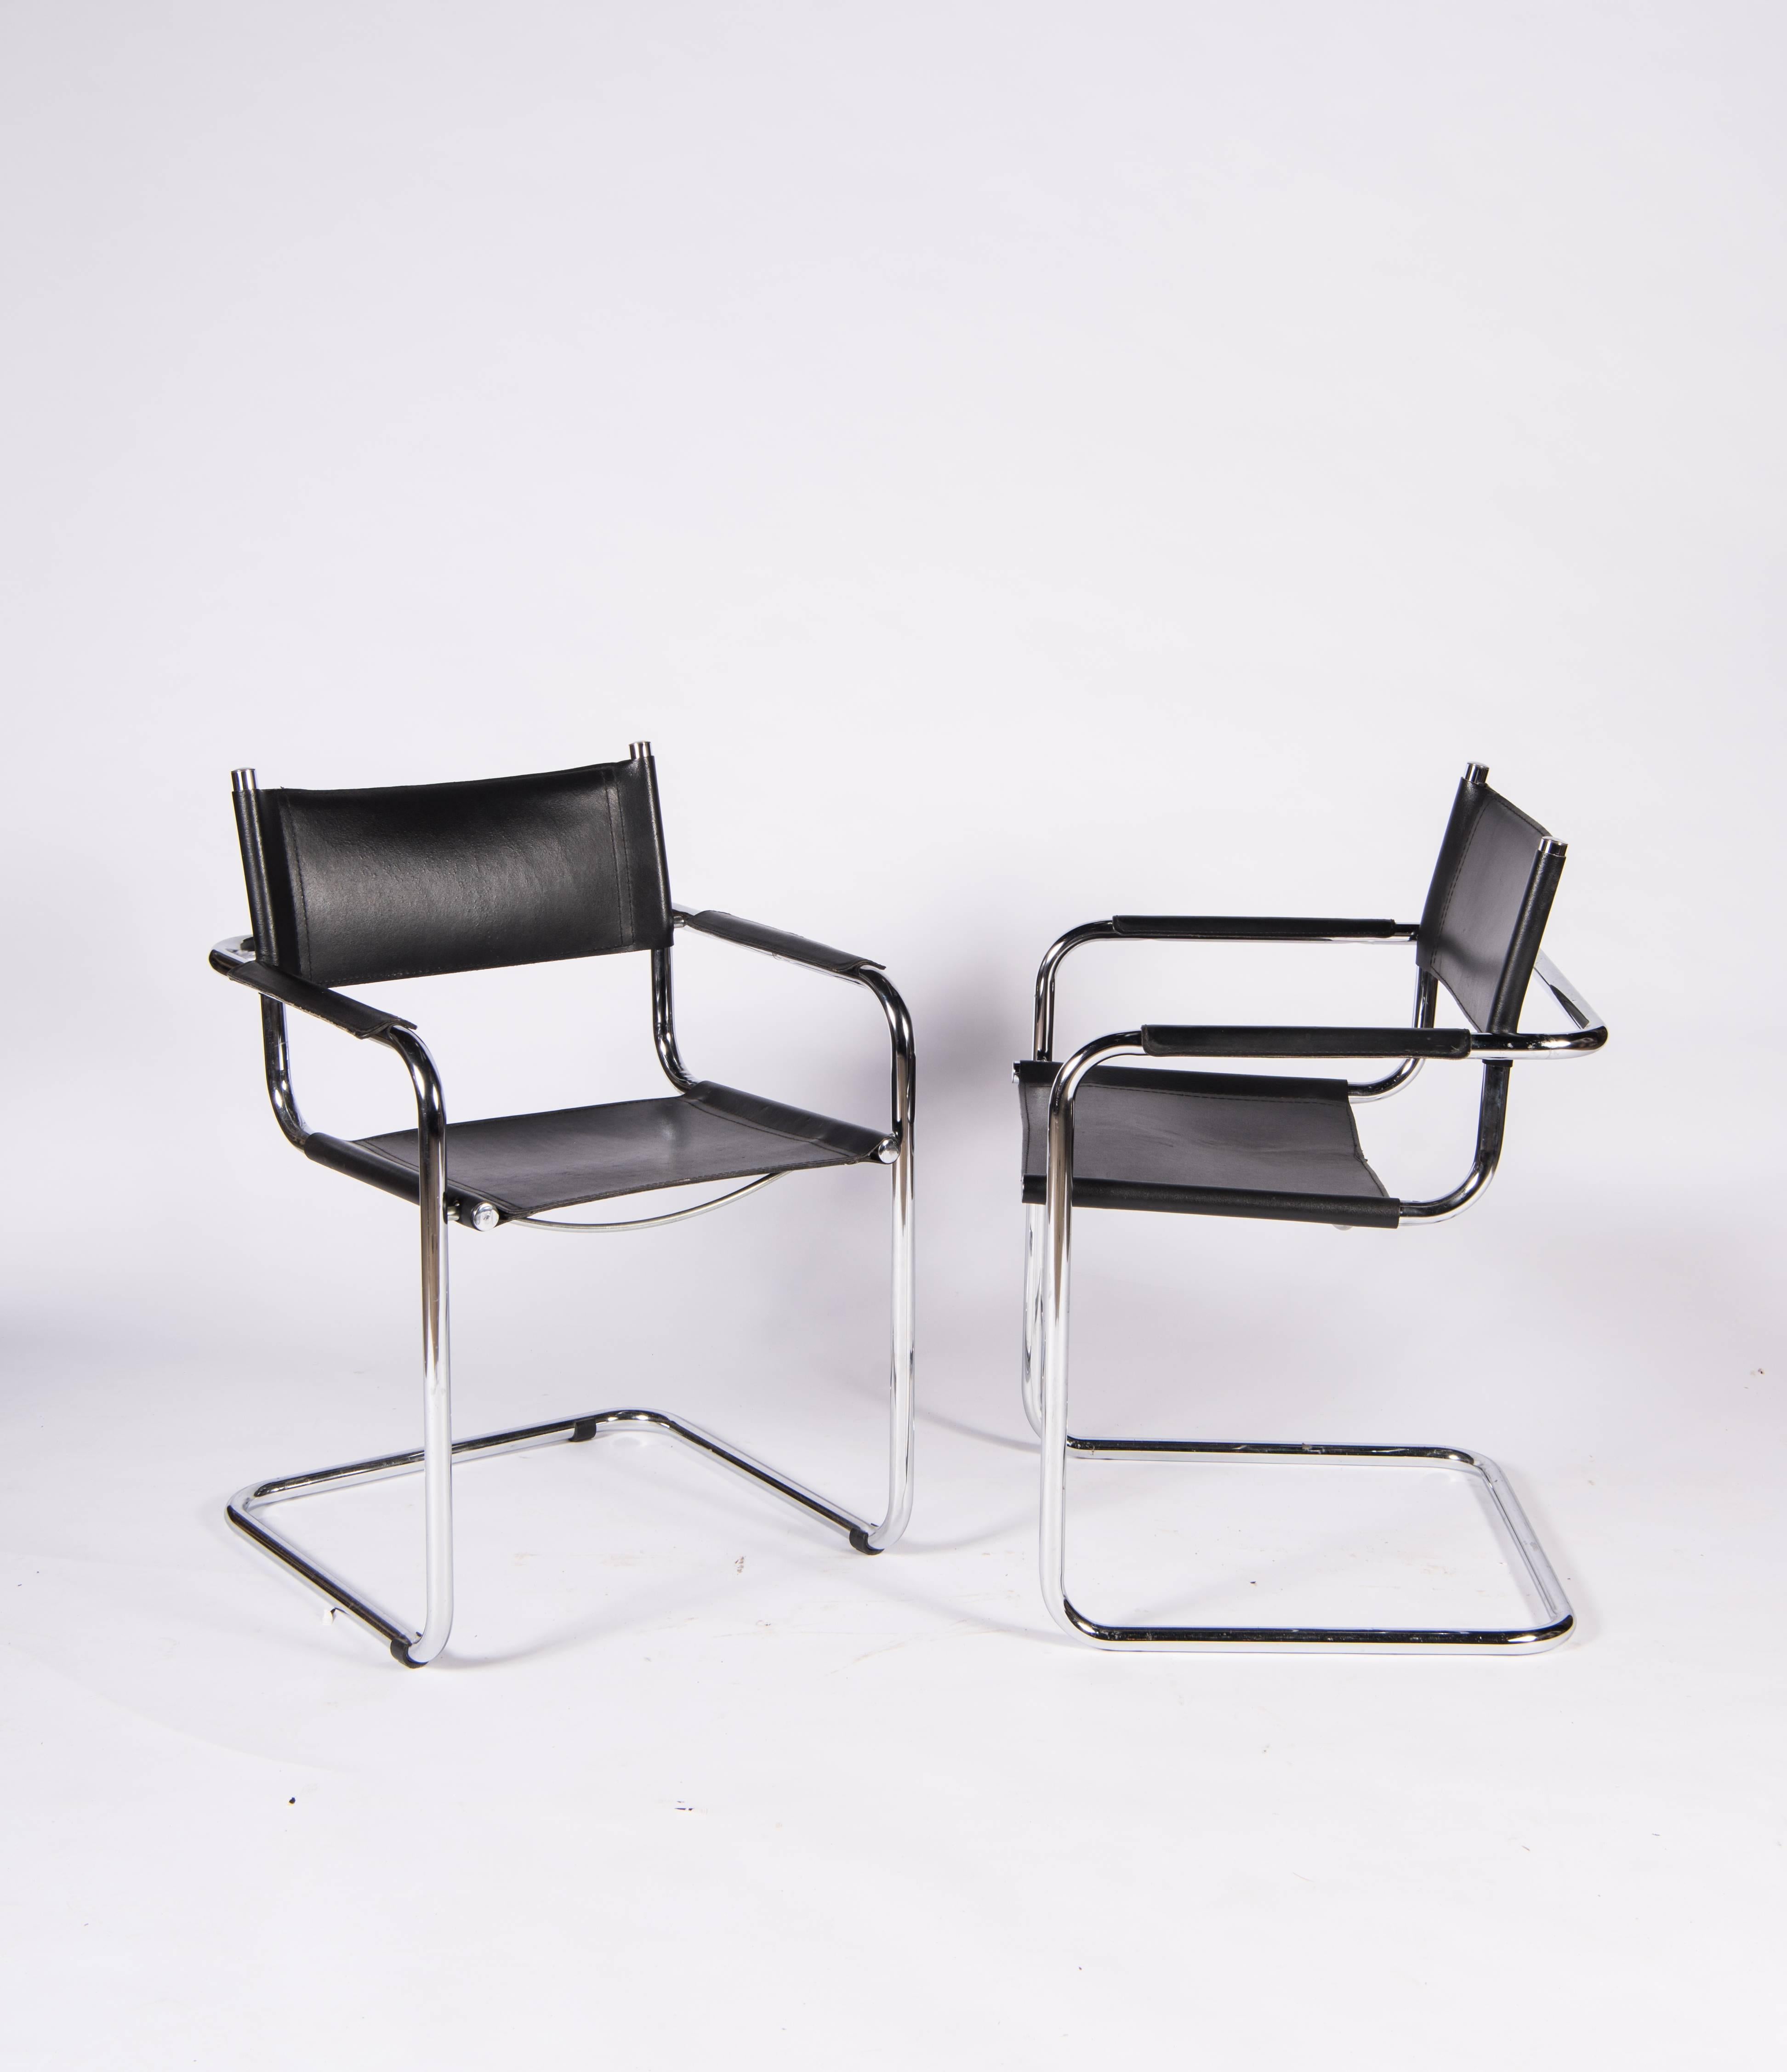 Four iconic cantilevered armchairs of chrome tubular steel with black leather sling seat and back and black leather armrests in near pristine condition.
Designed by Mart Stam in 1927, chairs of this style were the first cantilevered chairs in